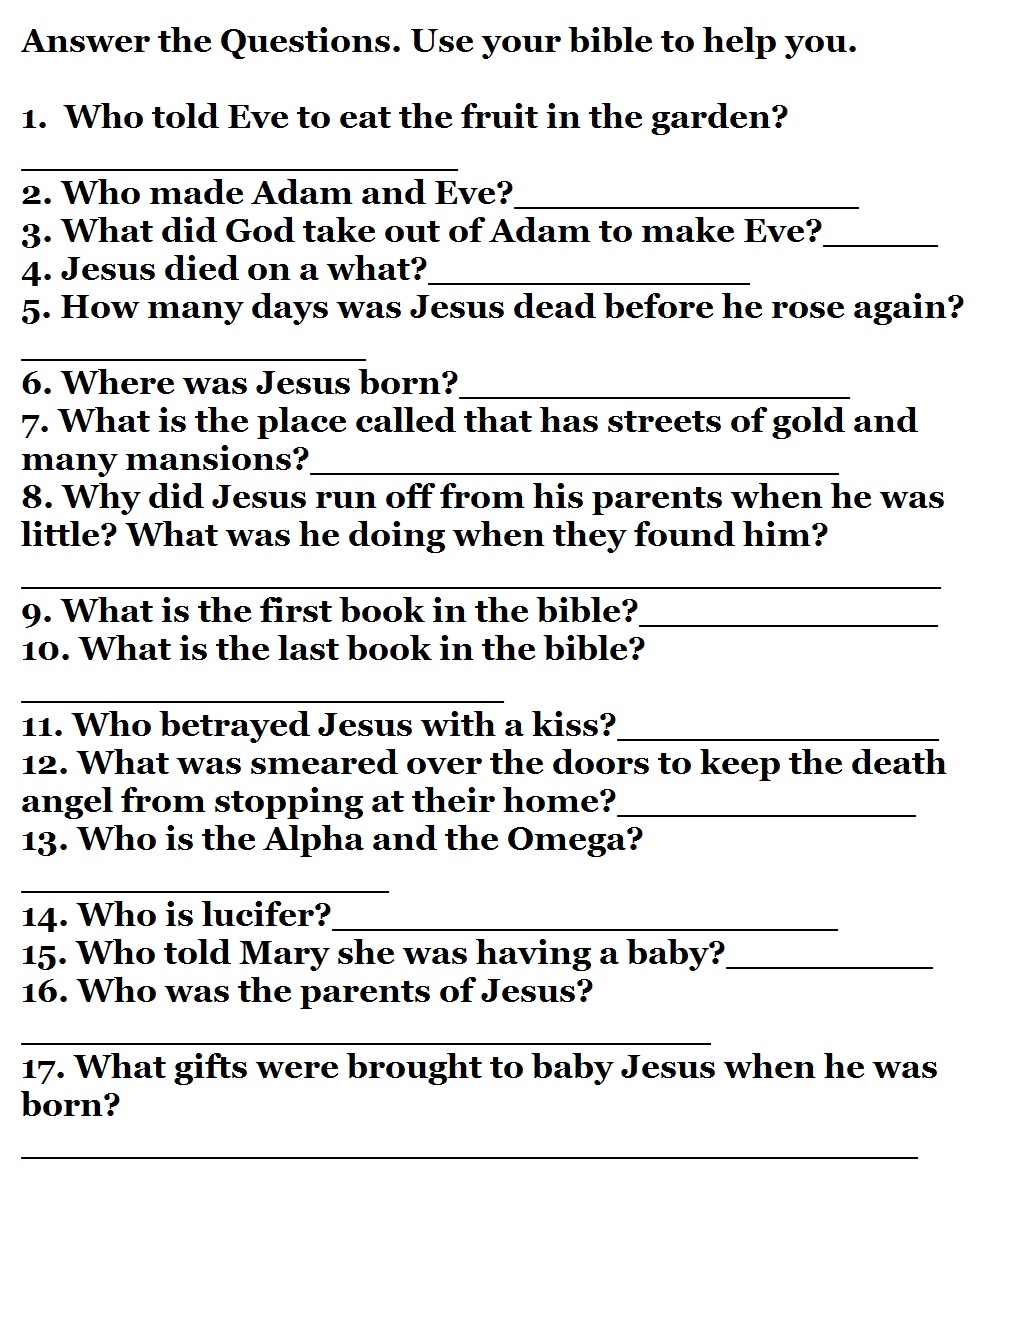 Printable Bible Quizzes - Free Printable Bible Trivia Questions and Answers